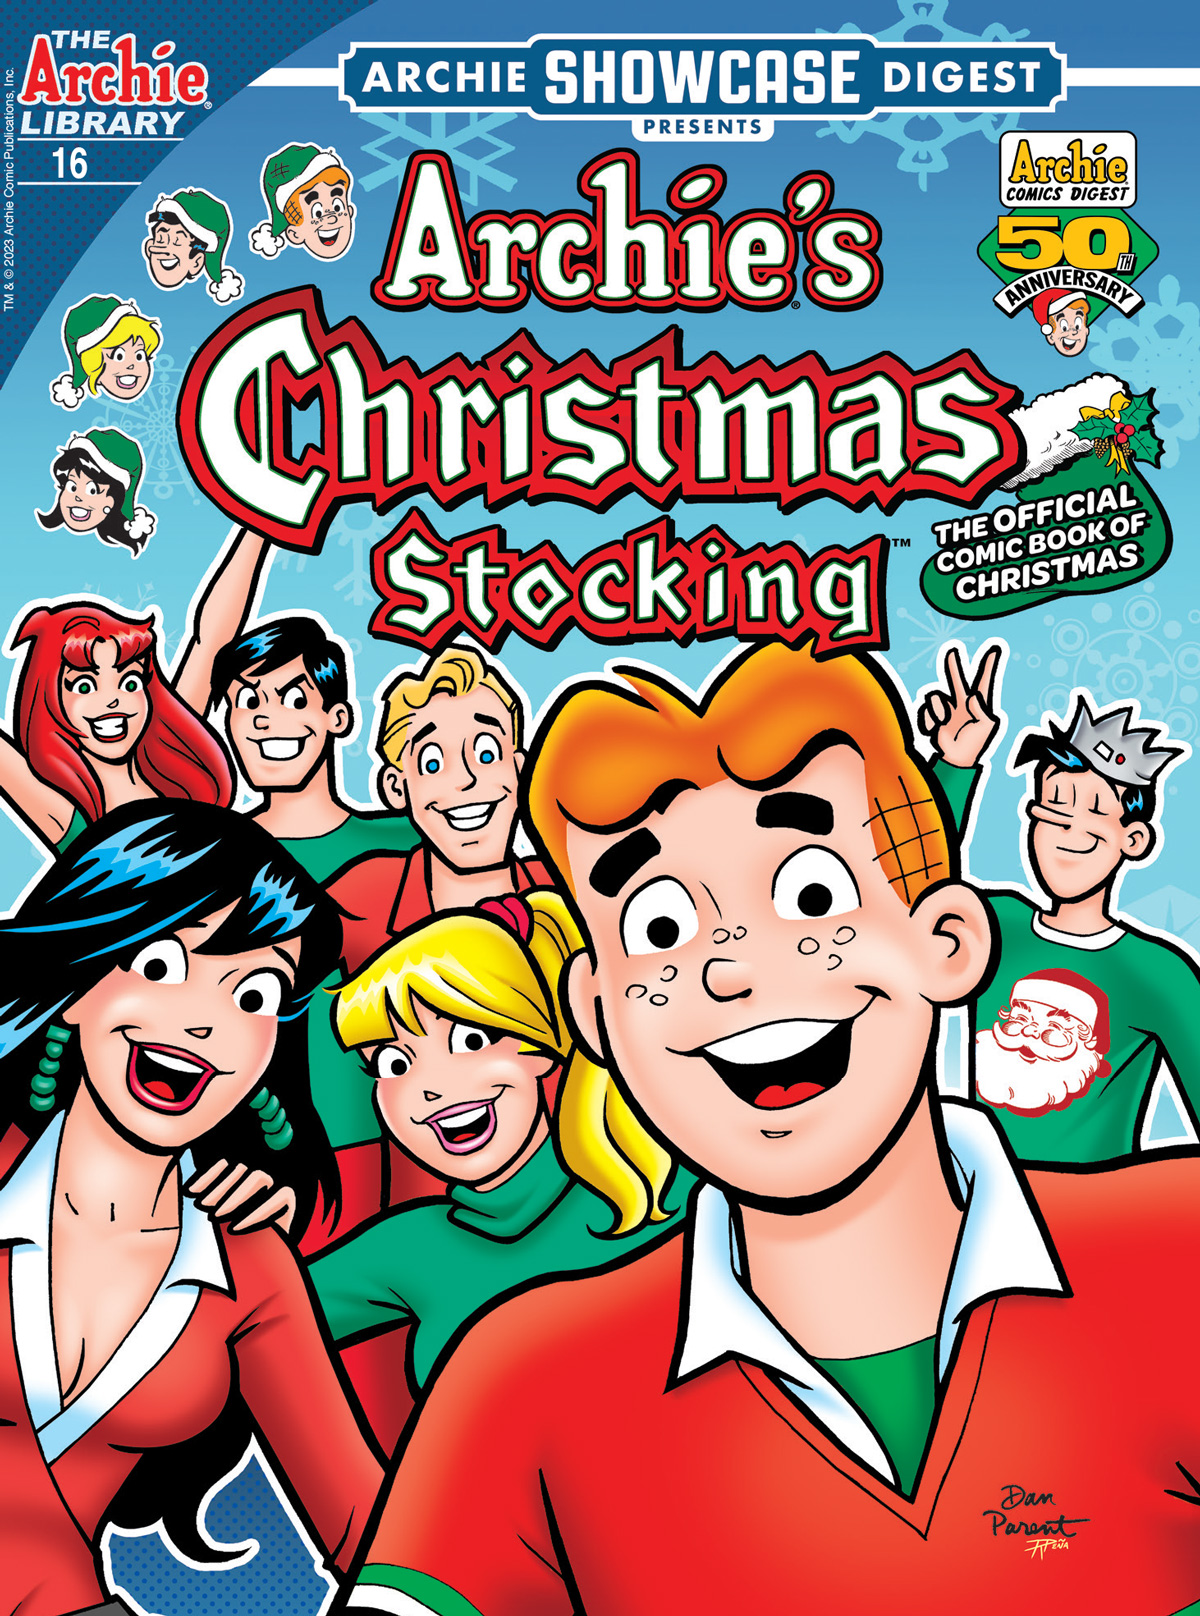 The cover of ARCHIE SHOWCASE DIGEST #16. Archie and all of his friends celebrate Christmas.